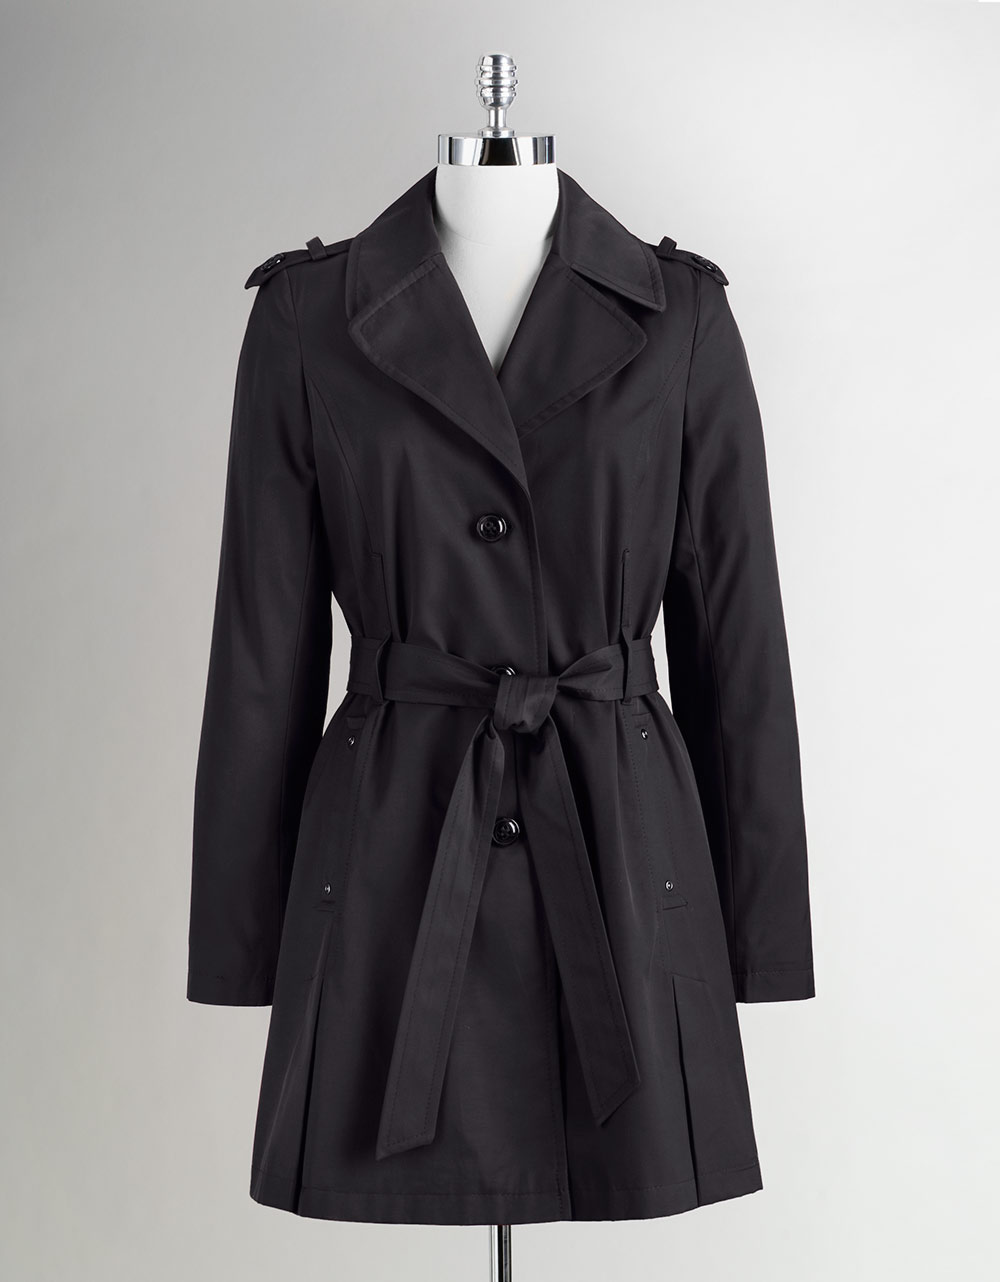 Dkny Belted Trench Coat in Black | Lyst